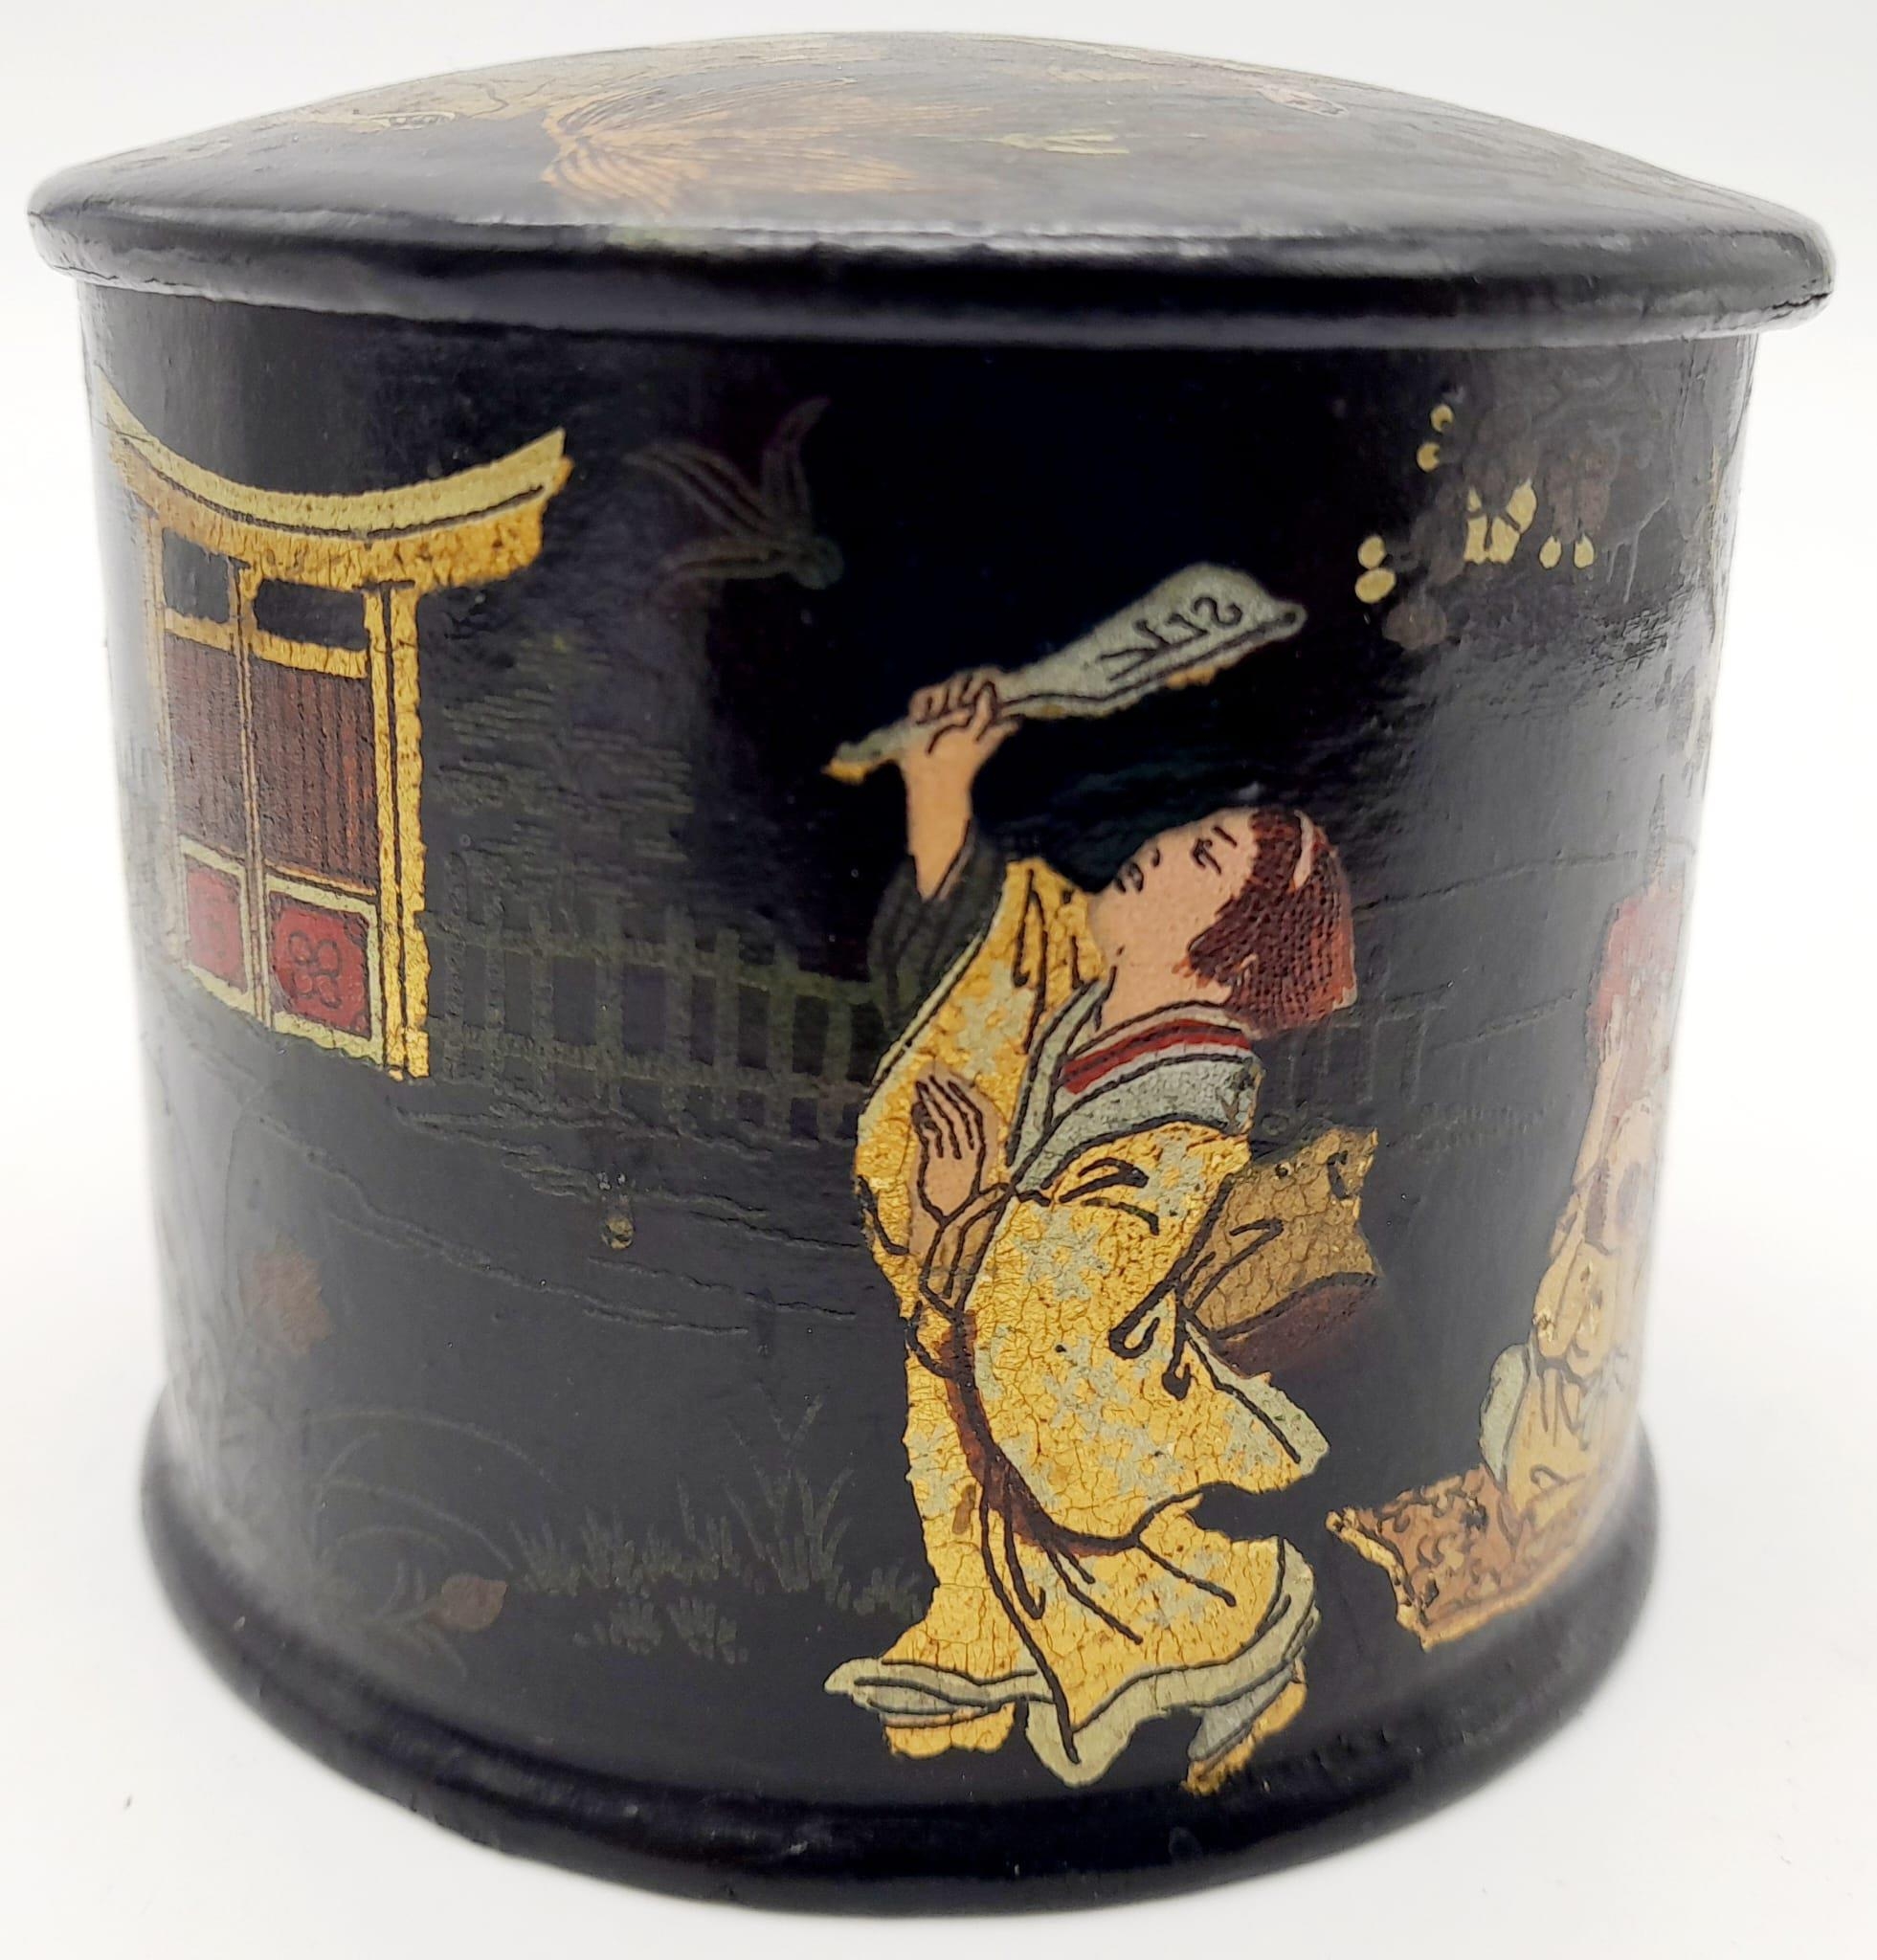 An Antique Chinese Black Lacquer Box. Wonderful decoration with gold on black depicting Mothers at - Image 5 of 7